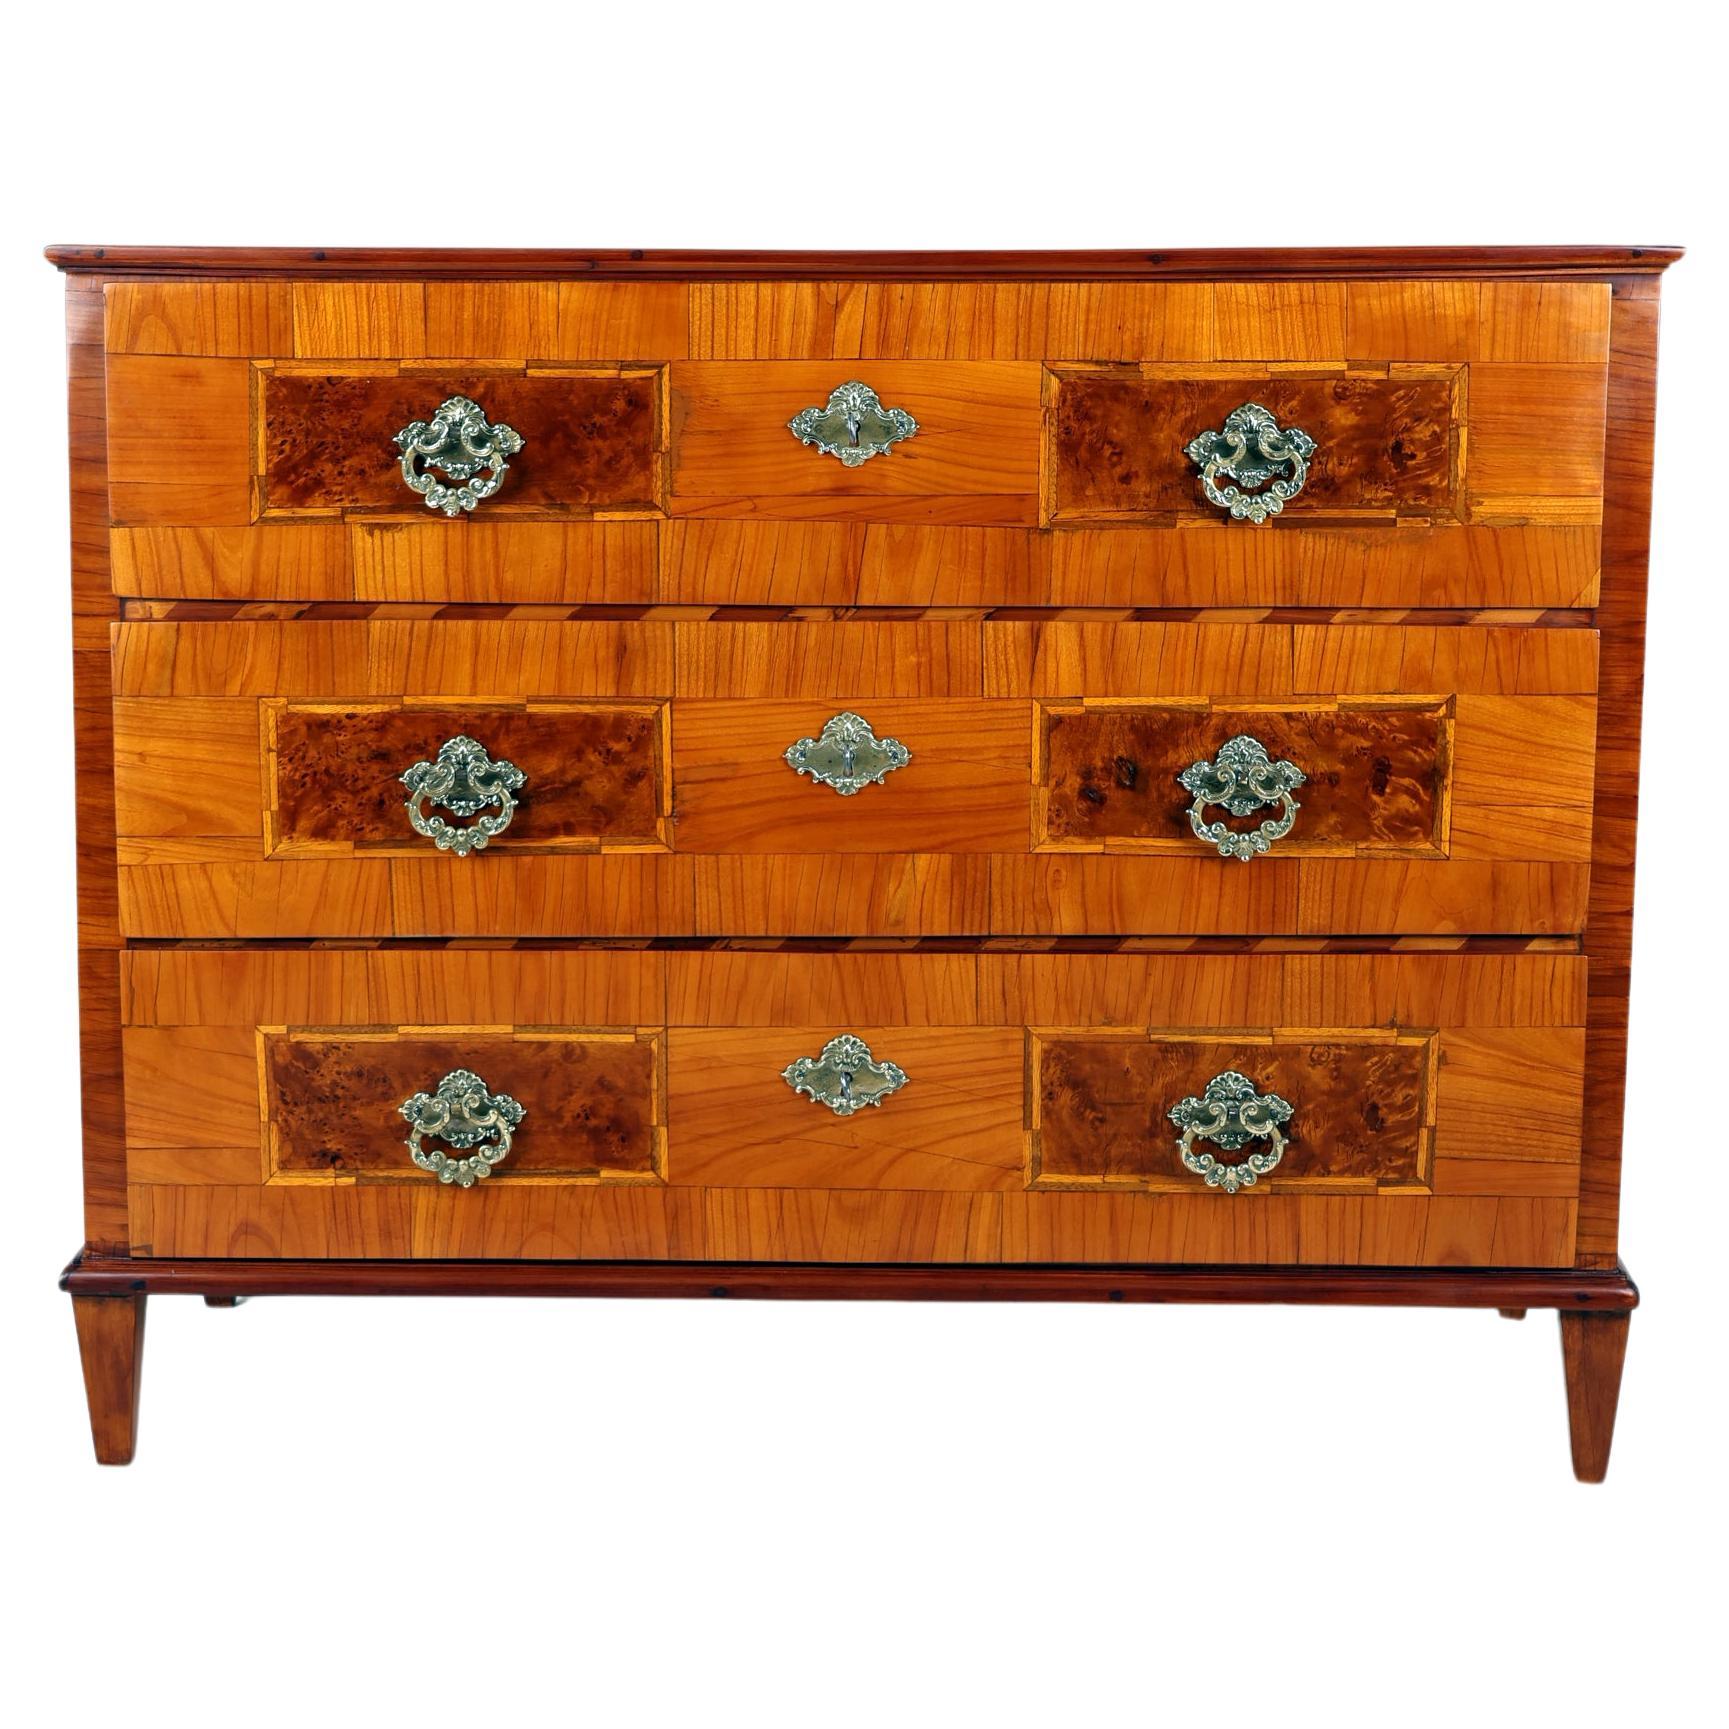 Louis XVI Chest of drawers from early 19th century , 
Germany, 1800
Cherry wood

This Louis XVI cherrywood chest of drawers is an original from 1800 and features three drawers with brass handles. With a length of 52 cm, a width of 117 cm and a